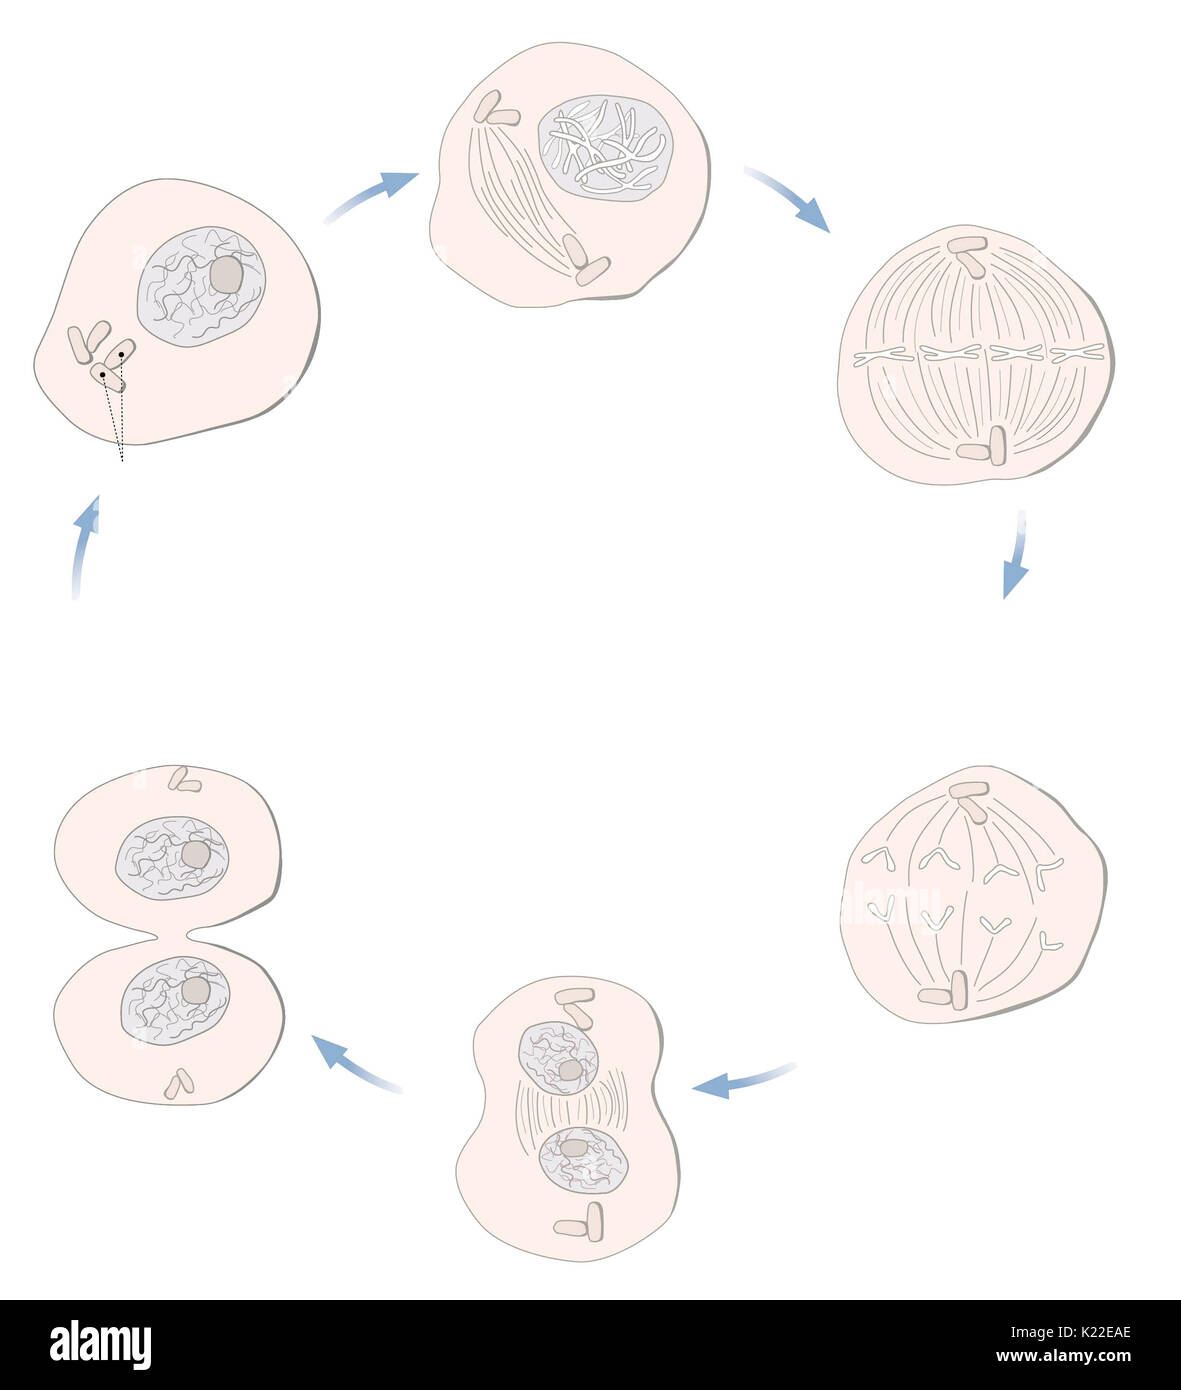 All the mechanisms of cell division that allow the formation of two identical daughter cells from a mother cell. Stock Photo